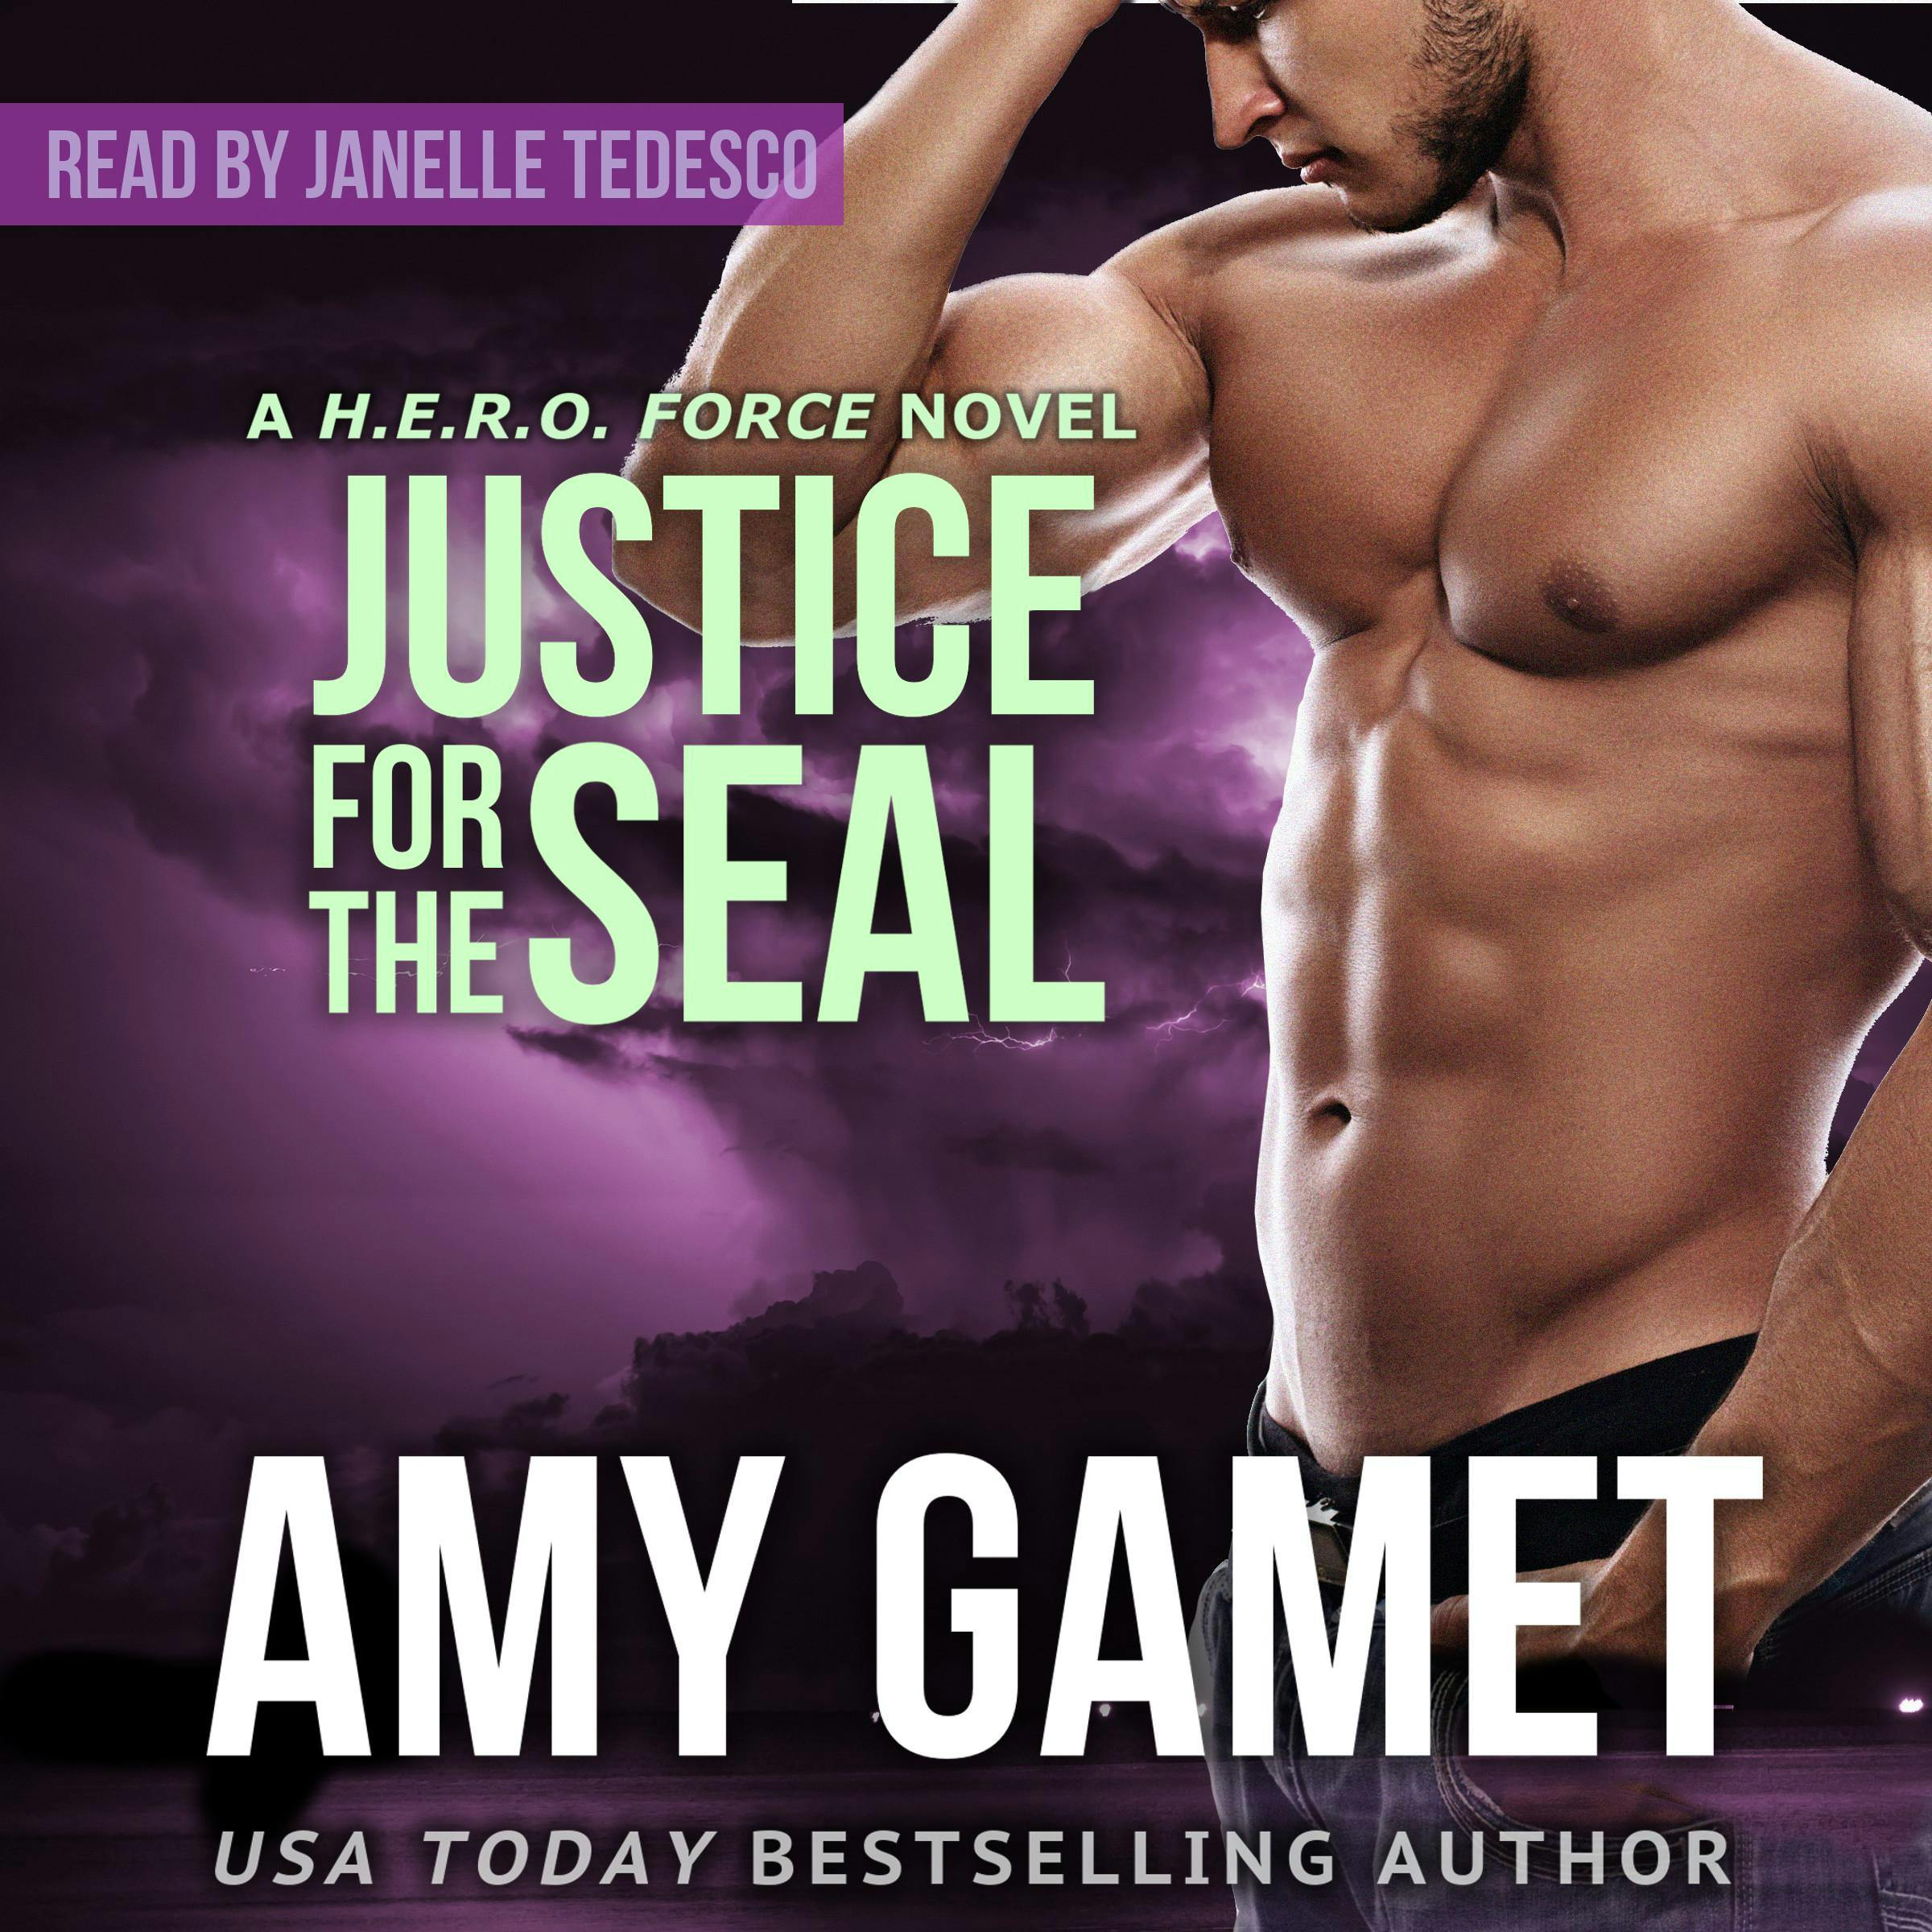 Justice for the SEAL - Amy Gamet